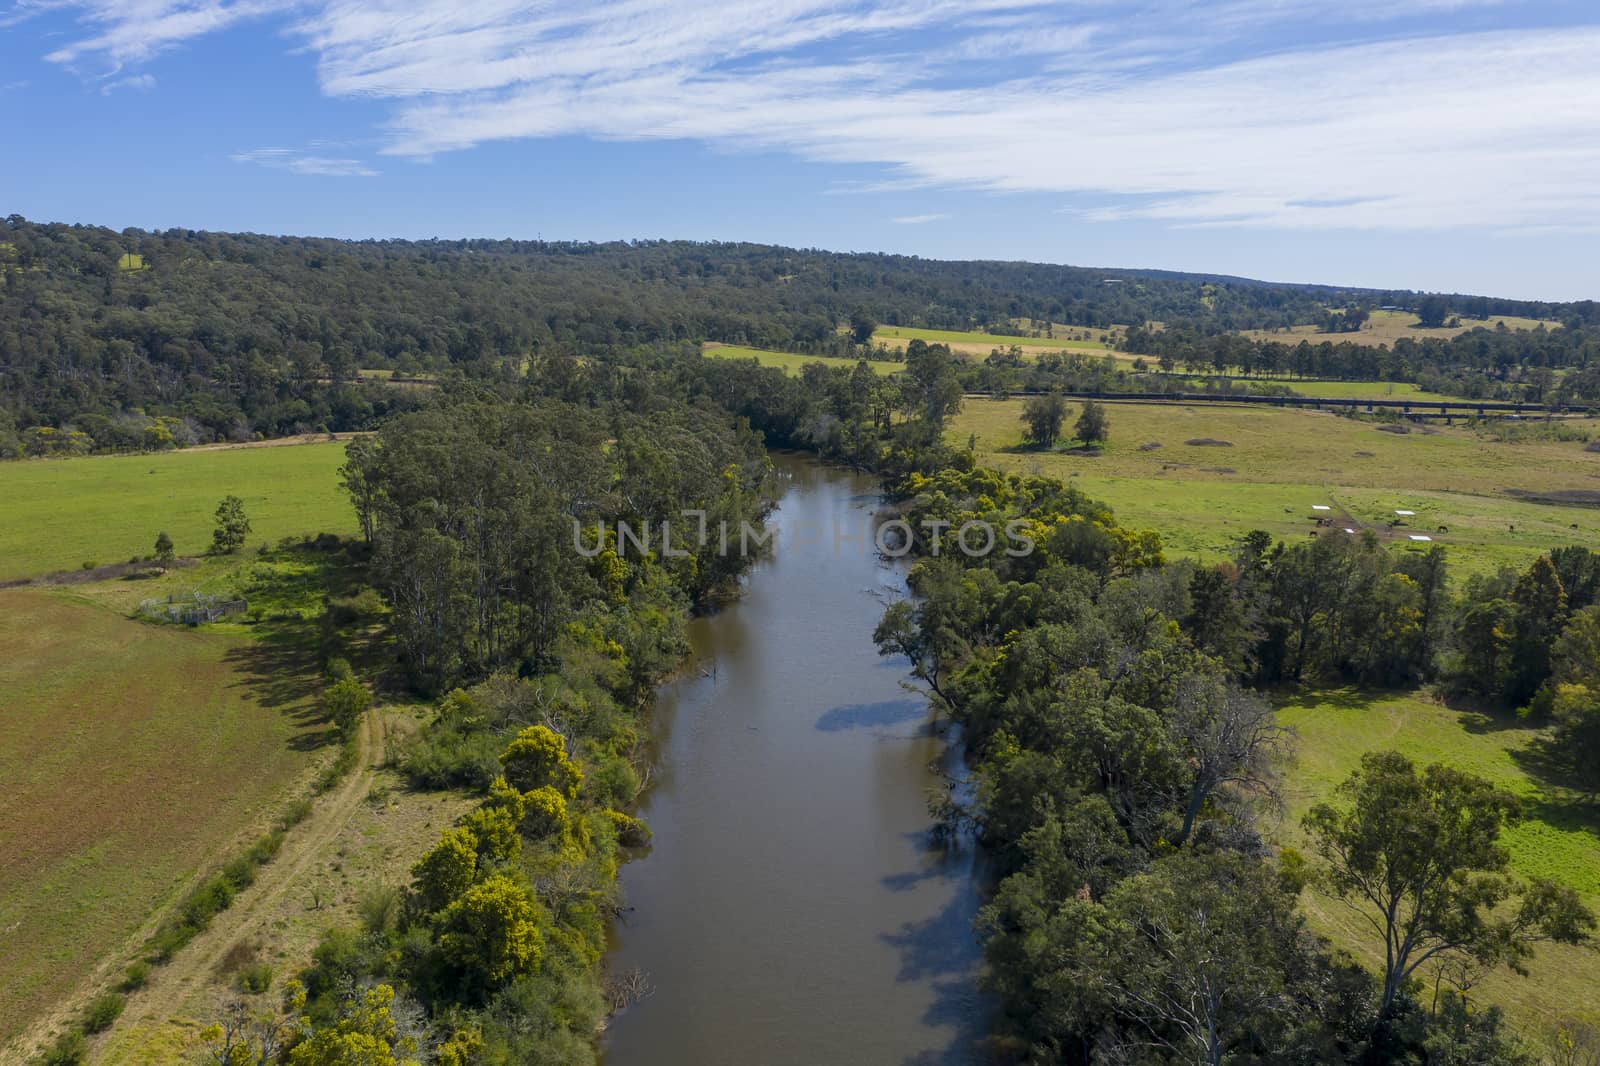 The Nepean River in Wallacia in New South Wales in Australia by WittkePhotos